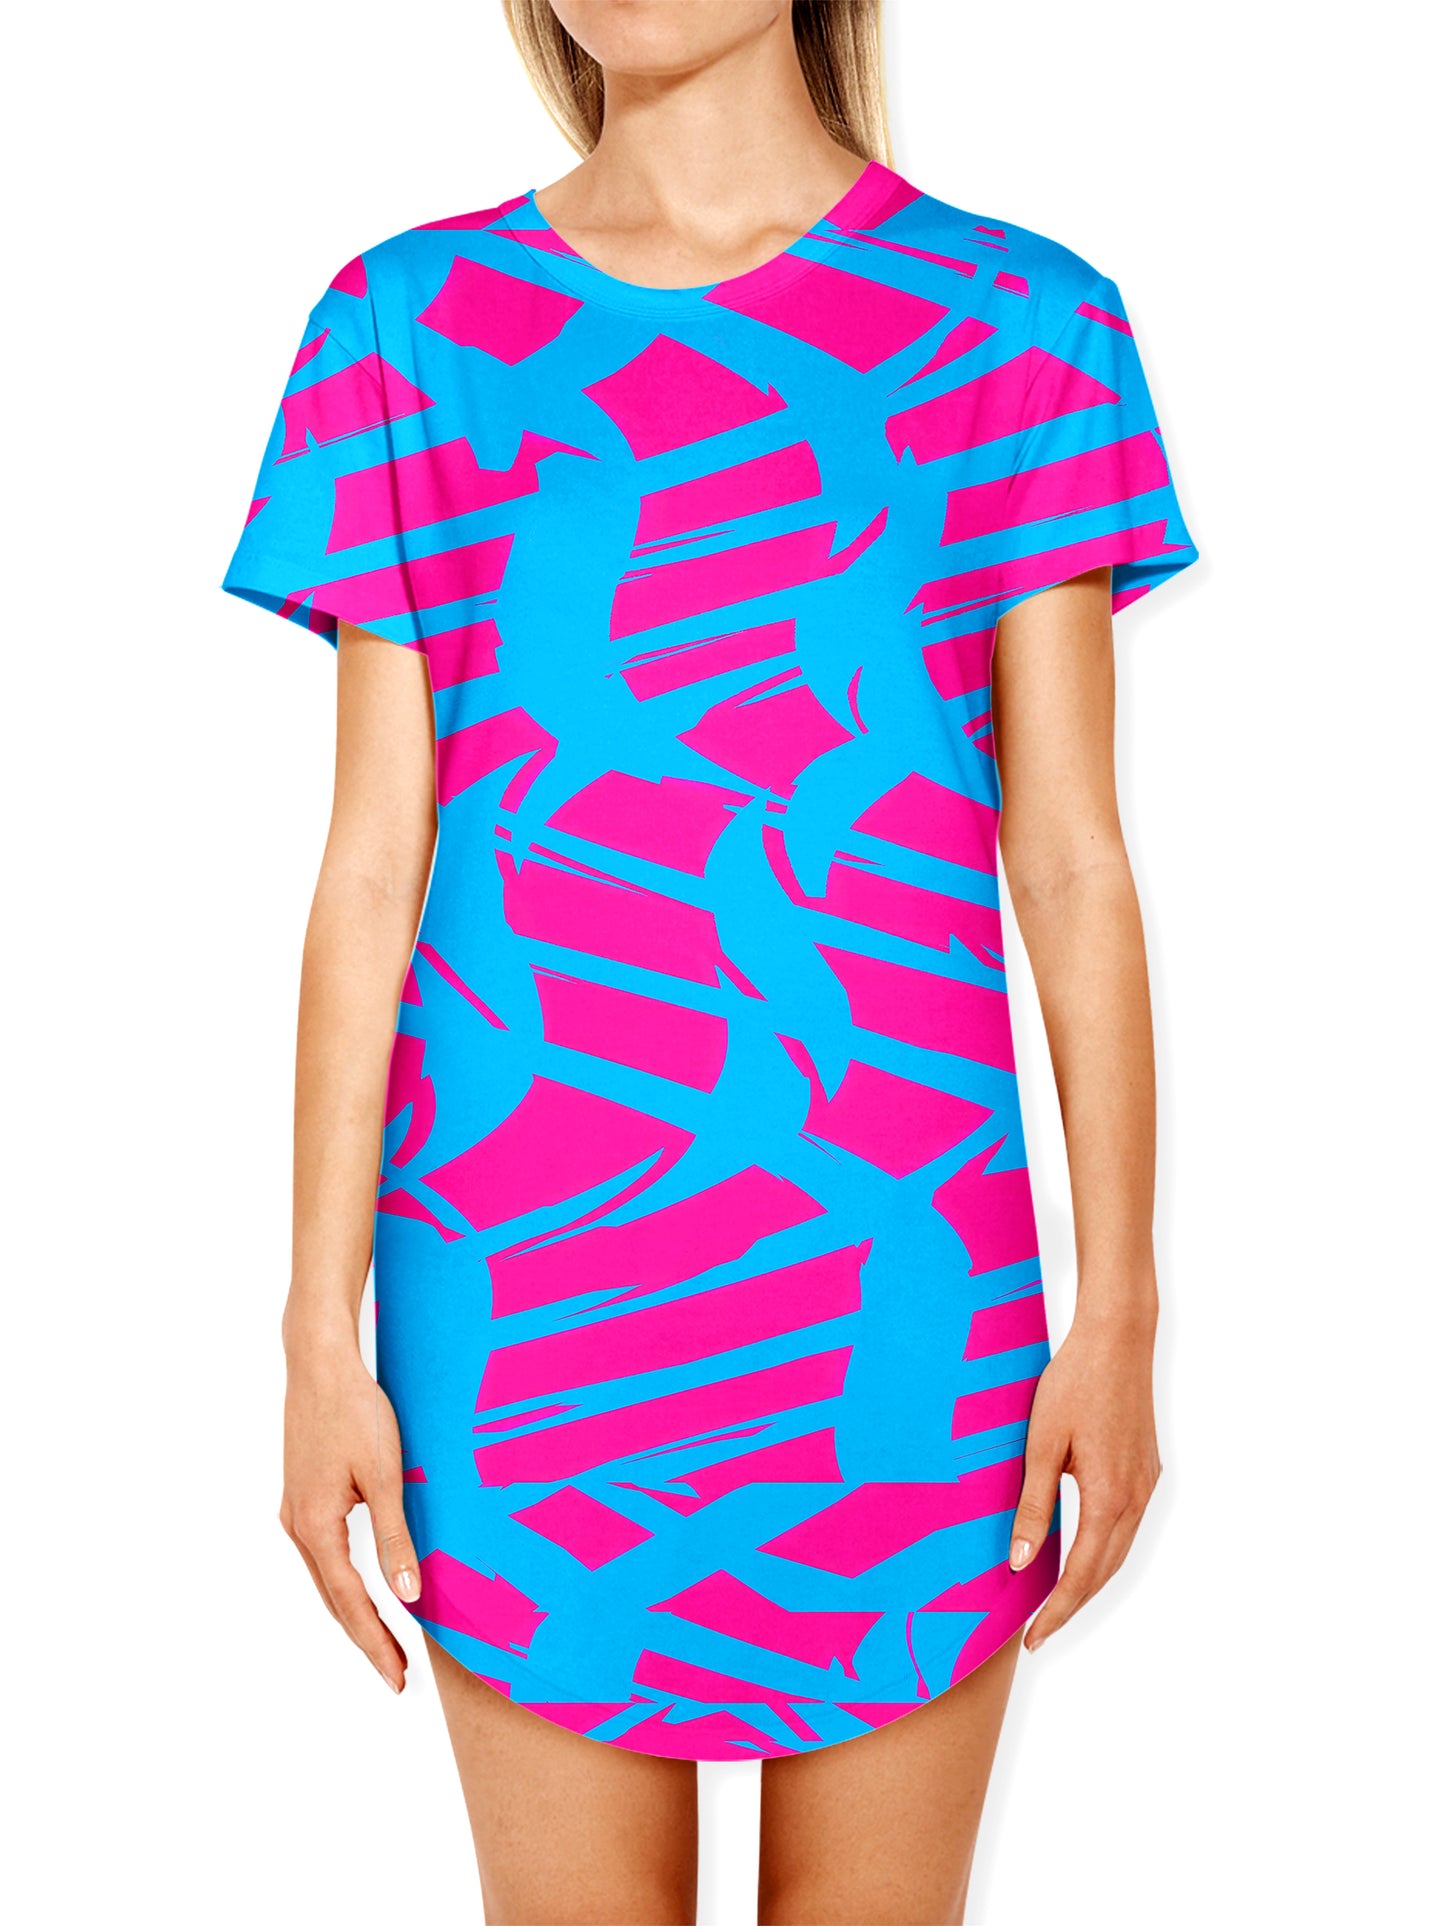 Pink and Blue Squiggly Rave Checkered Drop Cut T-Shirt, Big Tex Funkadelic, | iEDM